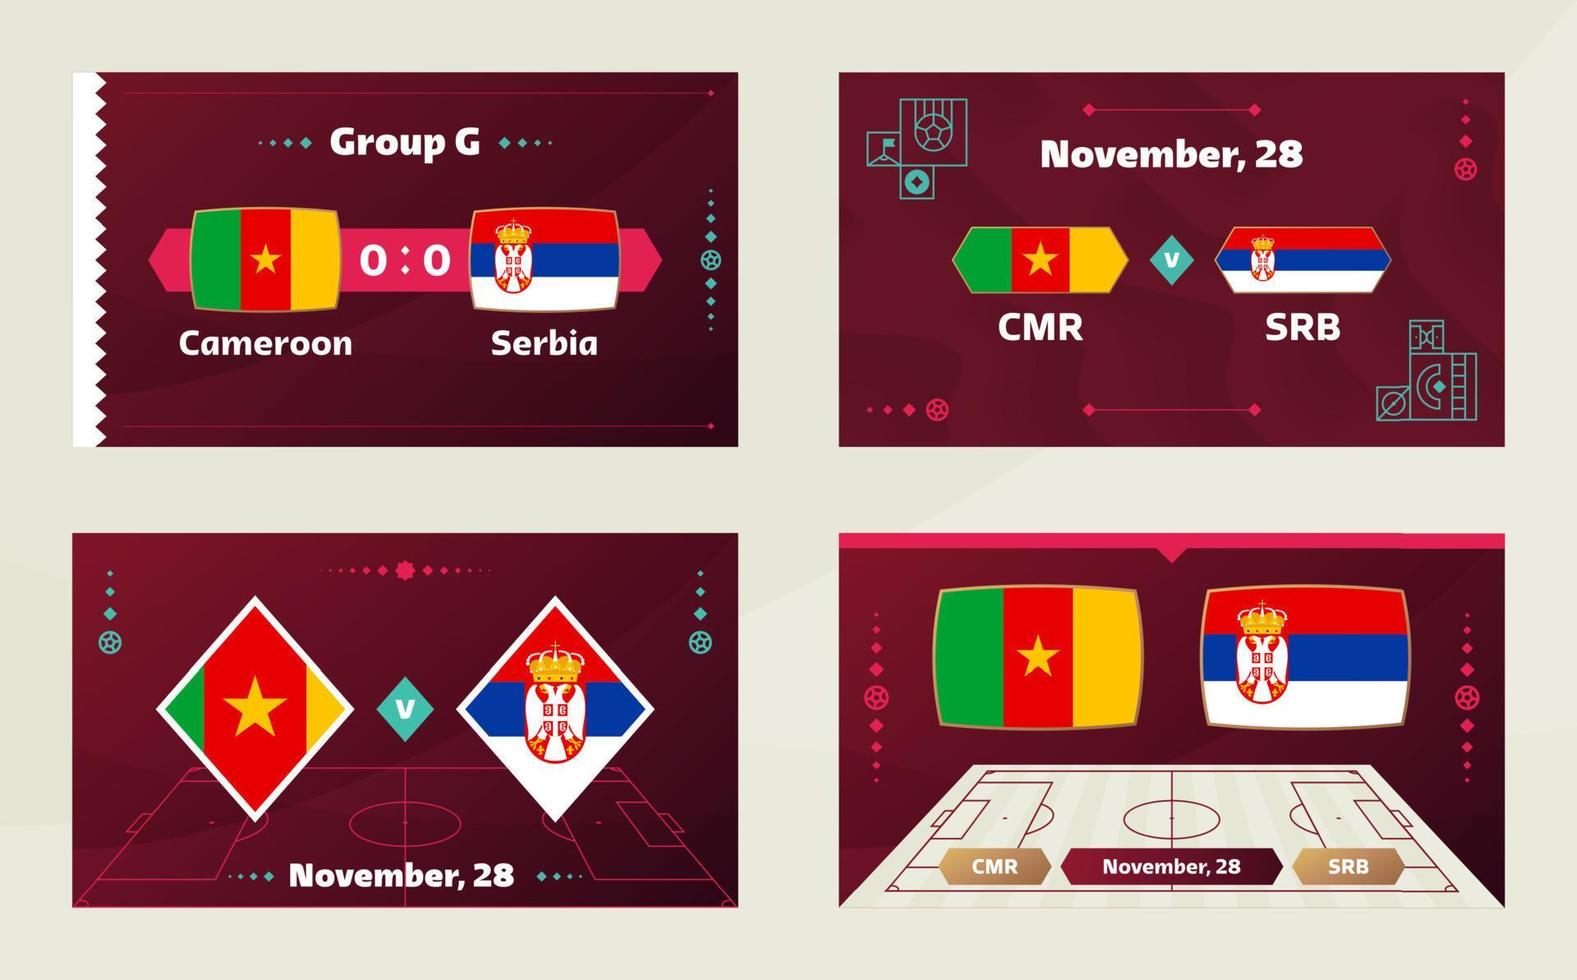 Cameroon vs Serbia, Football 2022, Group G. World Football Competition championship match versus teams intro sport background, championship competition final poster, vector illustration.